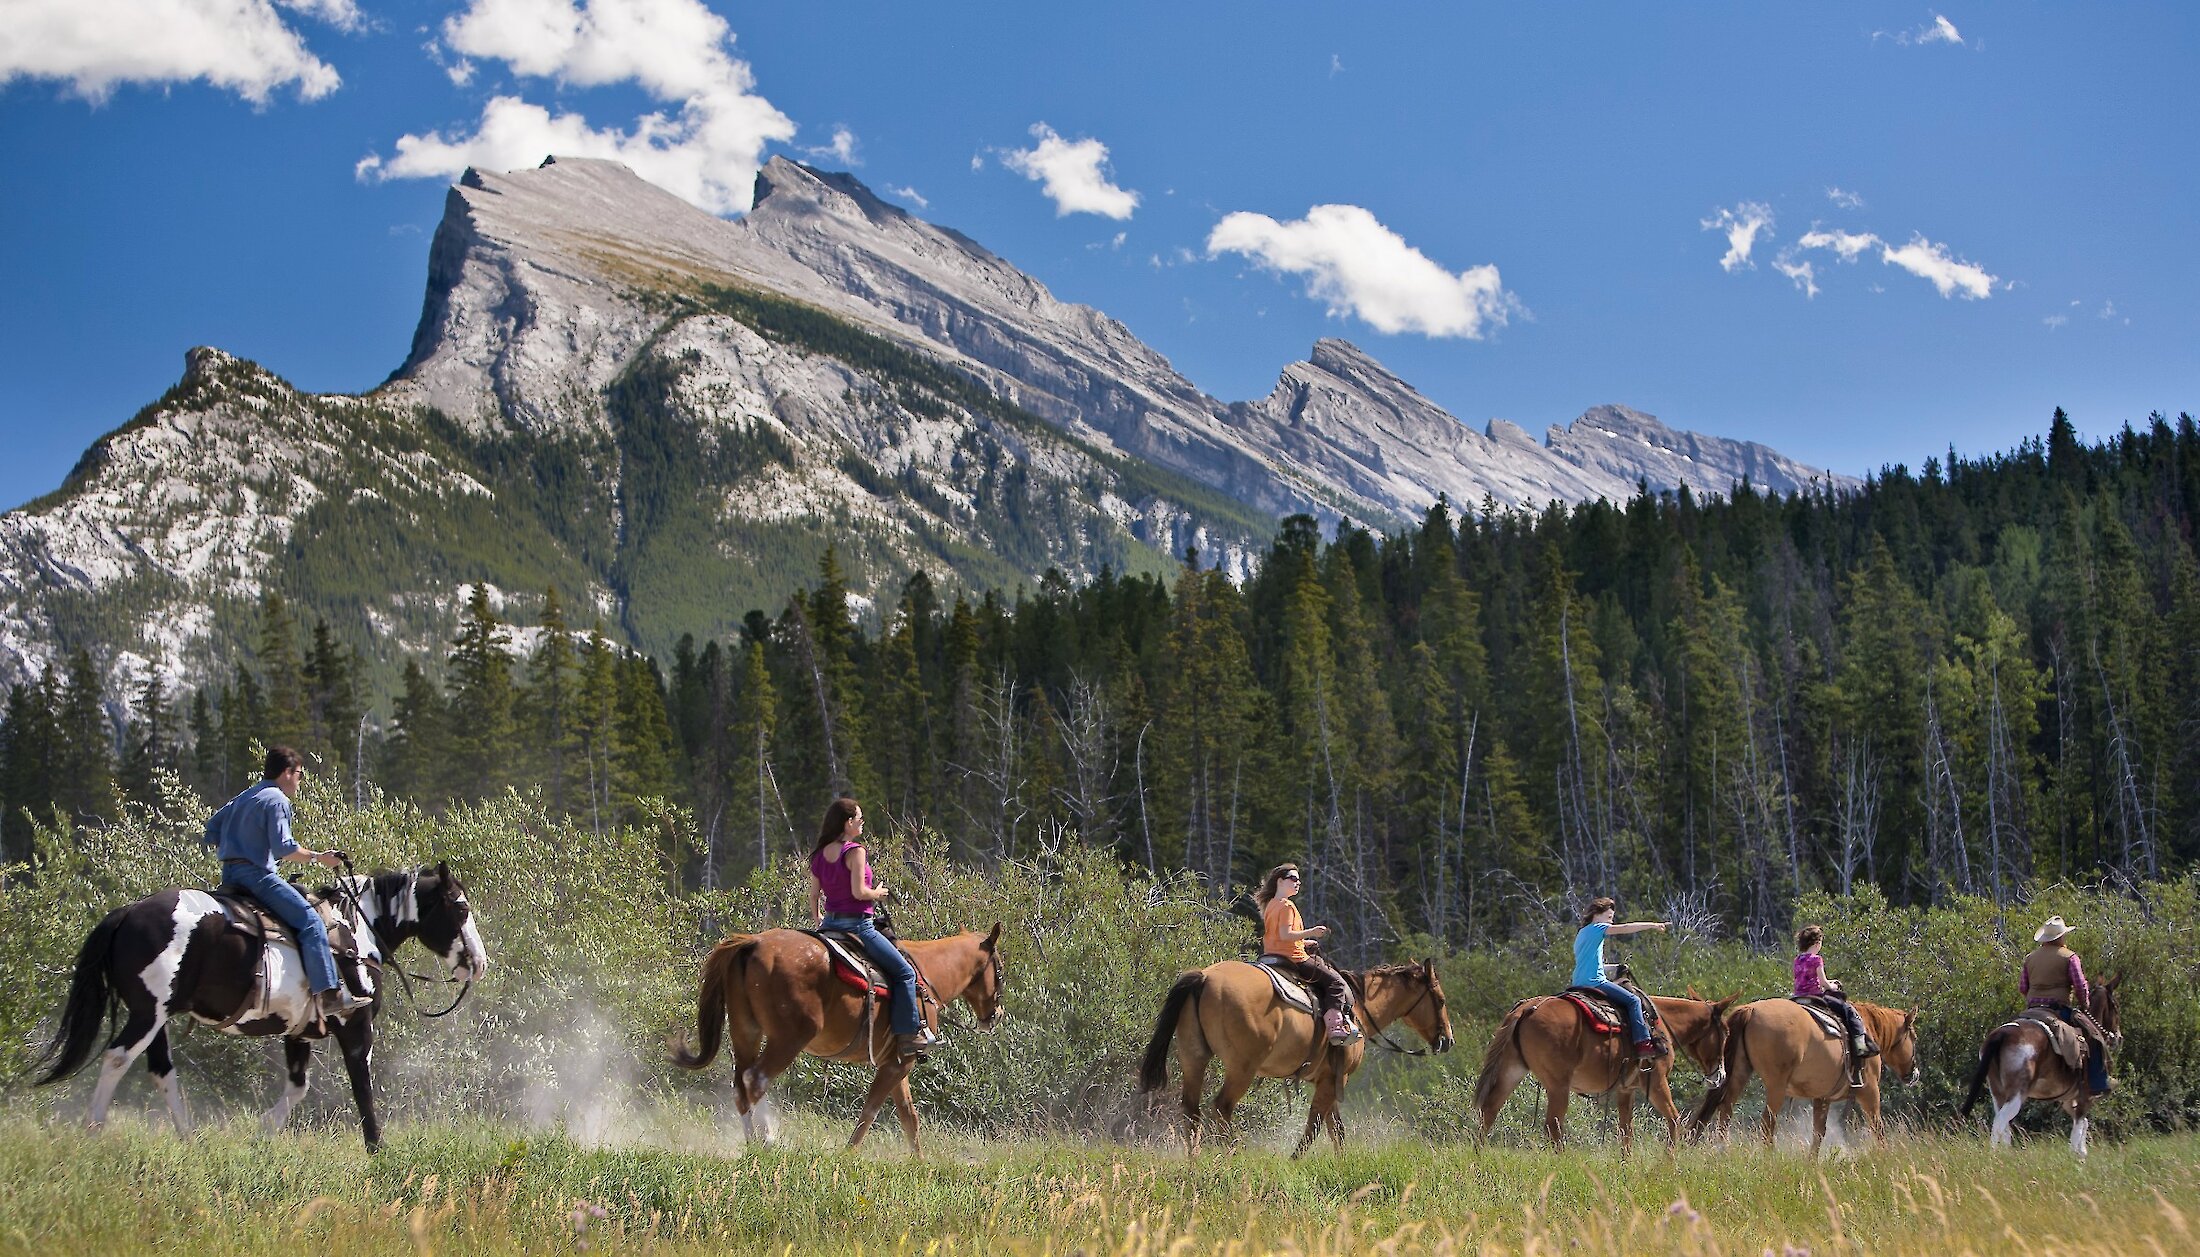 Enjoy a horse trail ride from the Banff stables